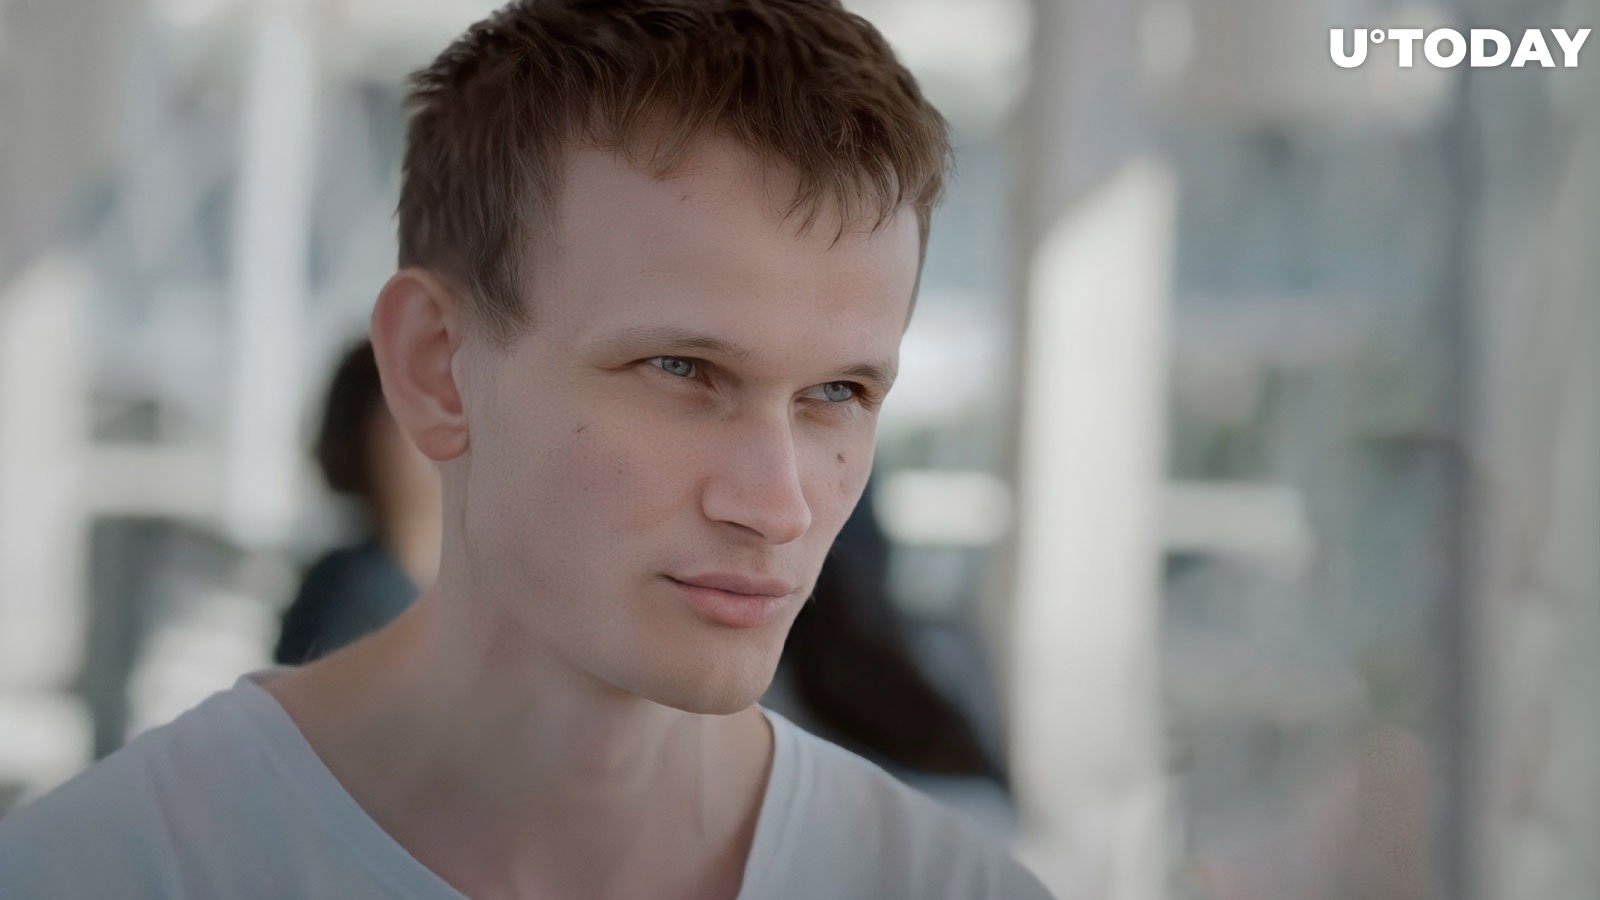 Vitalik Buterin Names Most Exciting Things About Ethereum Ecosystem